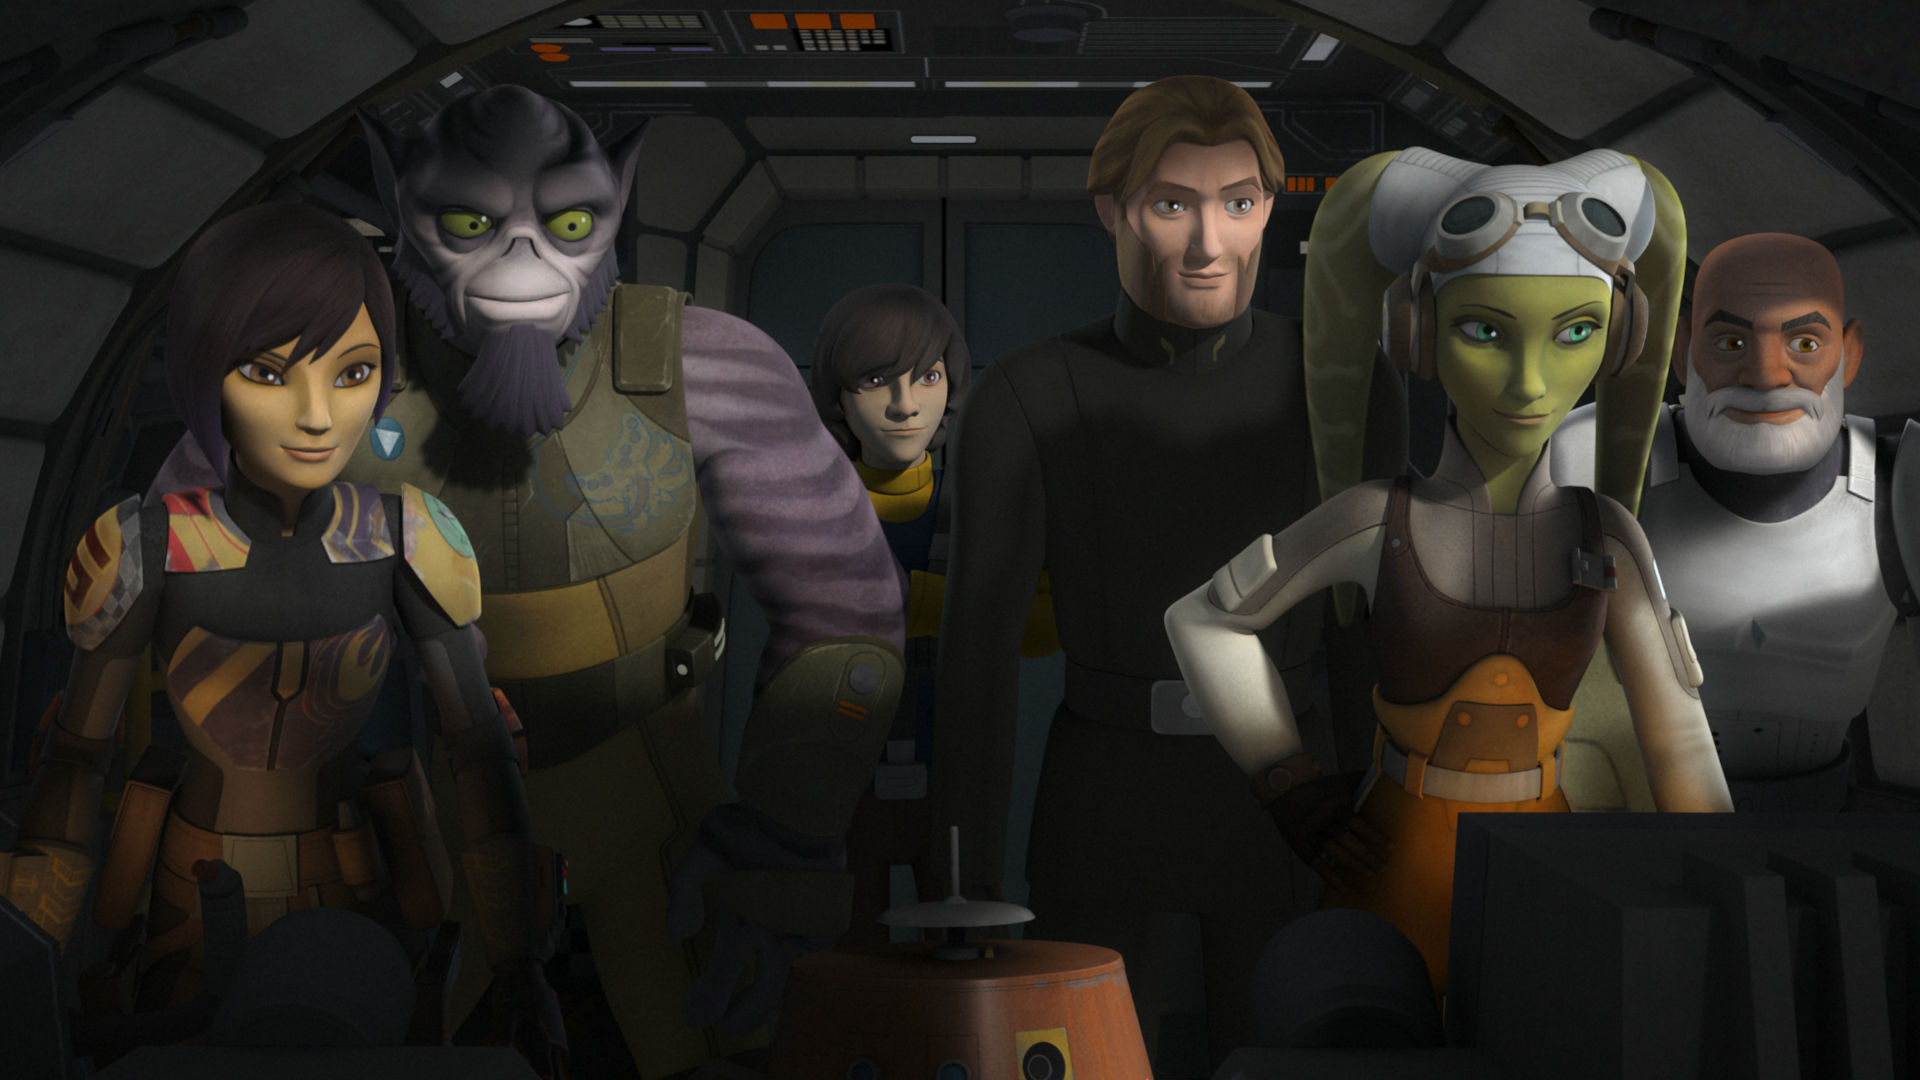 The Ending Of Star Wars Rebels Was Perfect Because It Was Also A Beginning